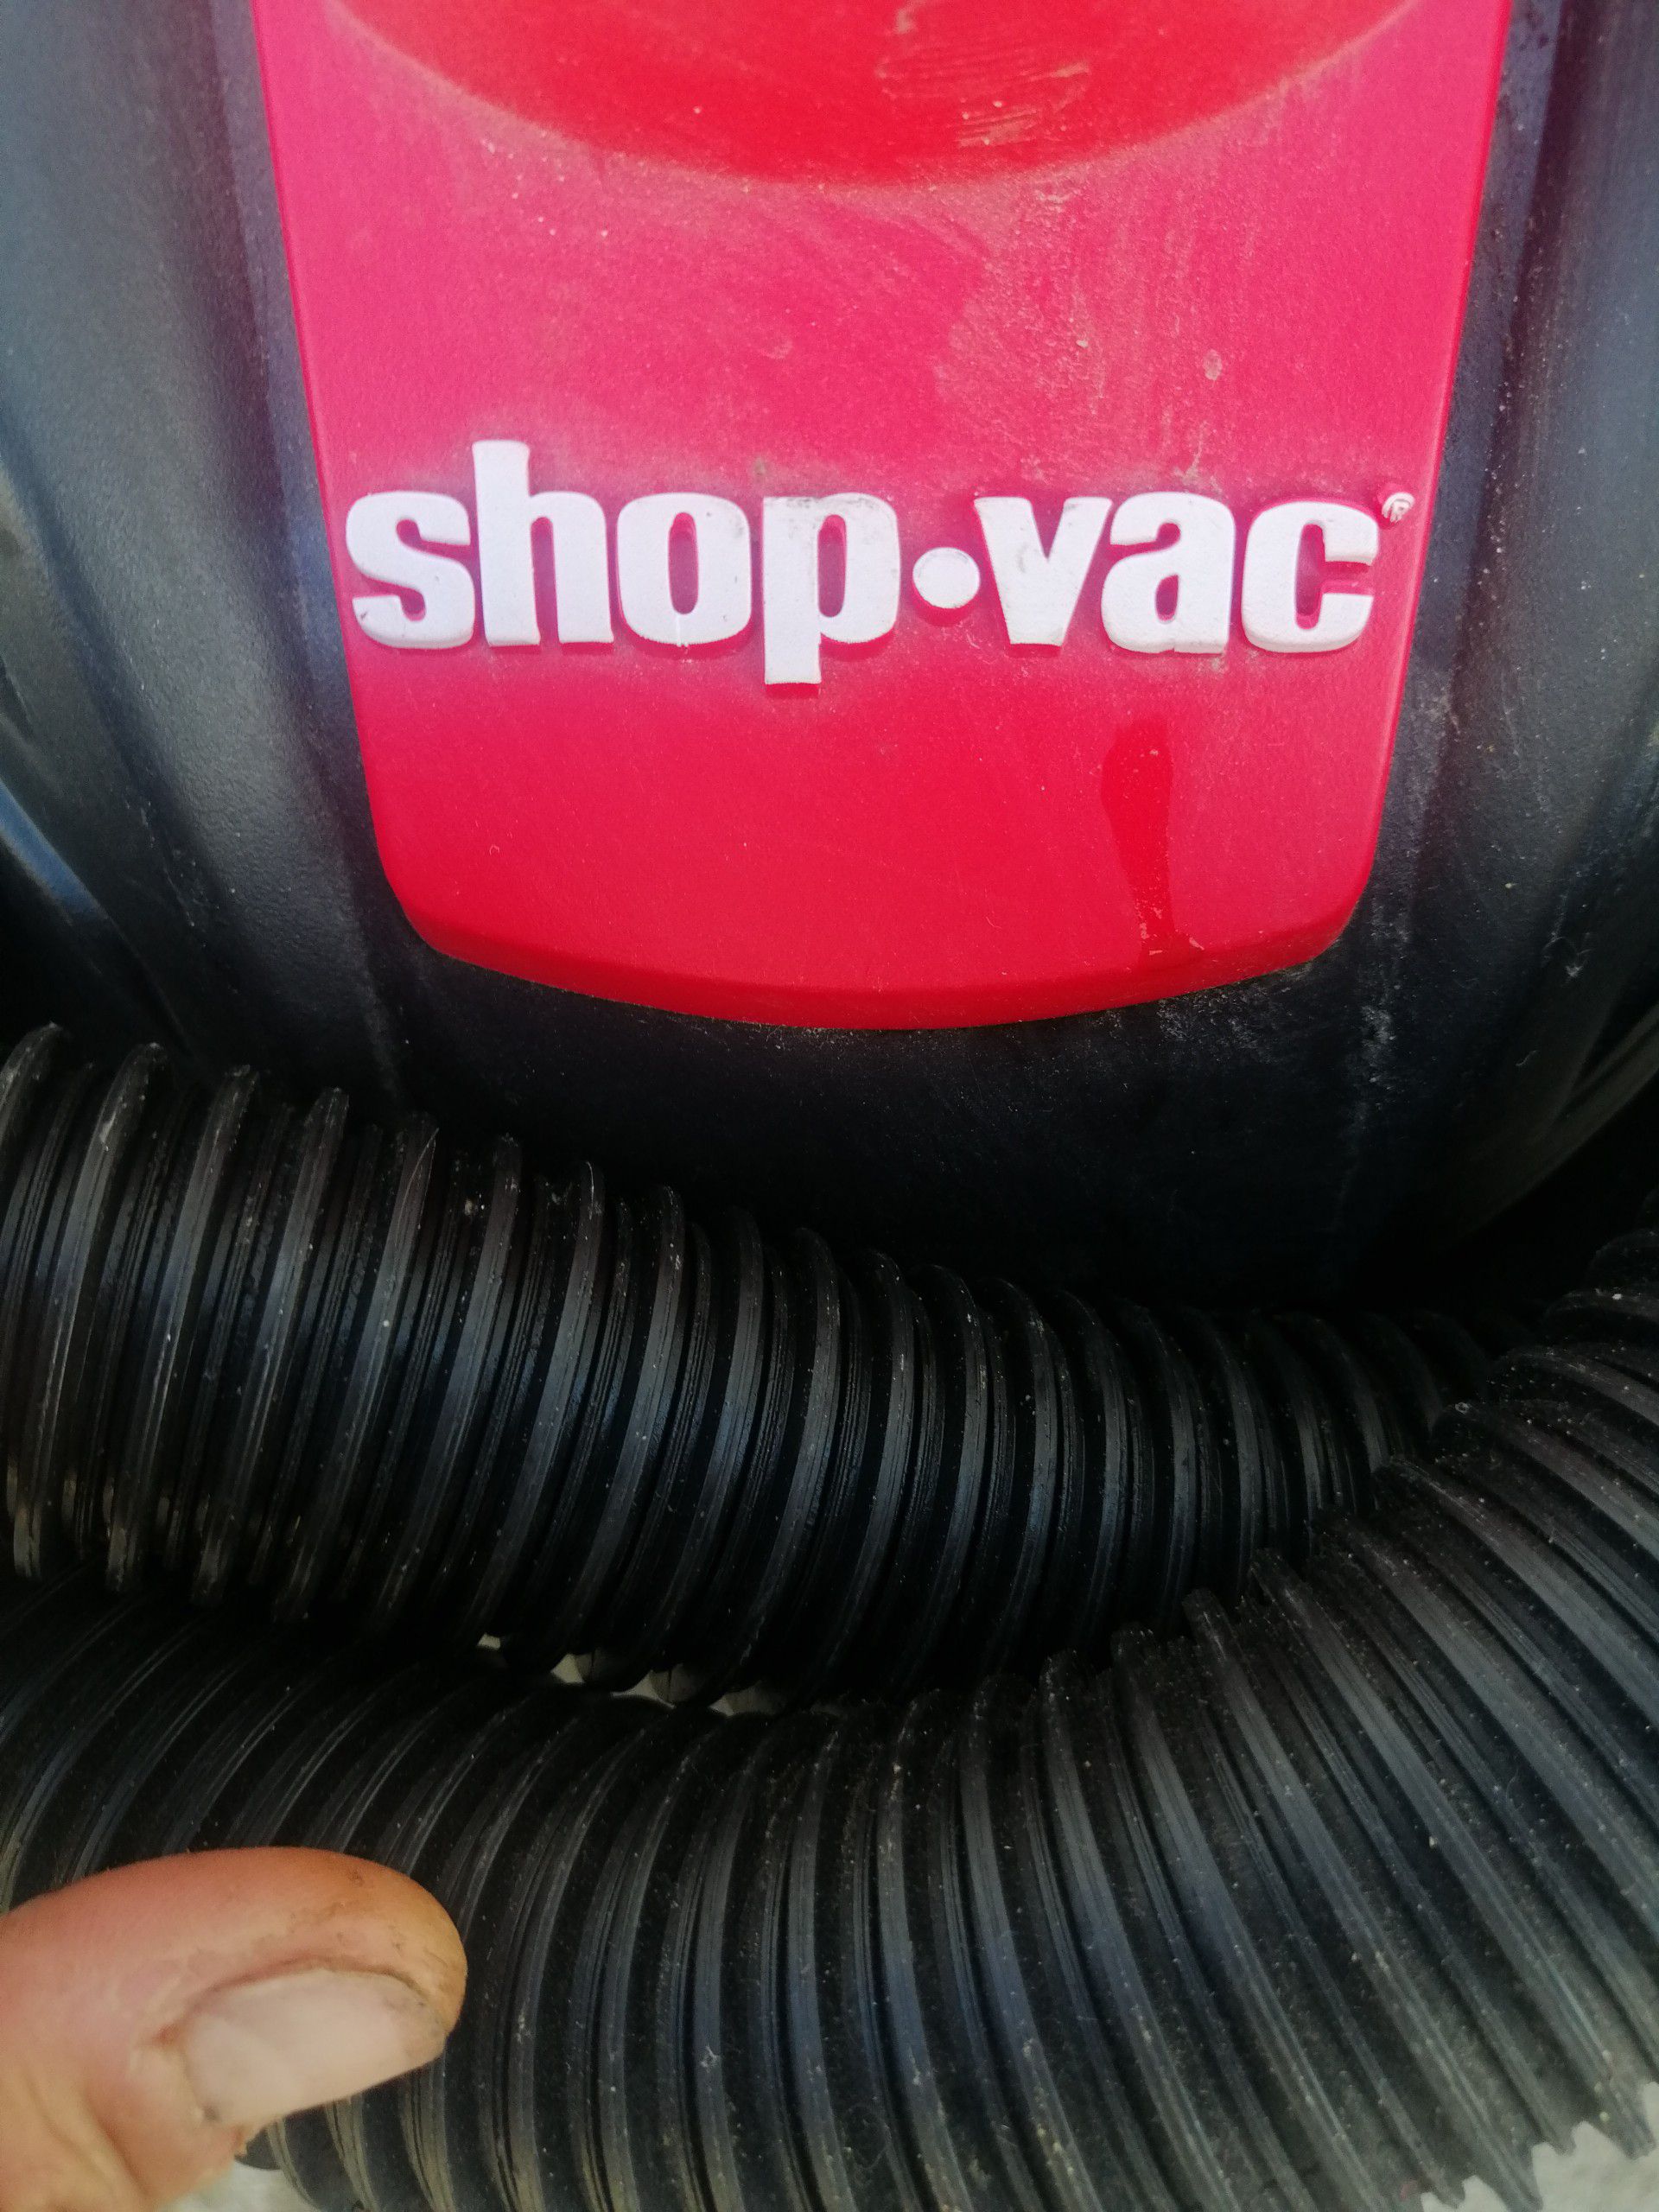 Shop vac wet or dry